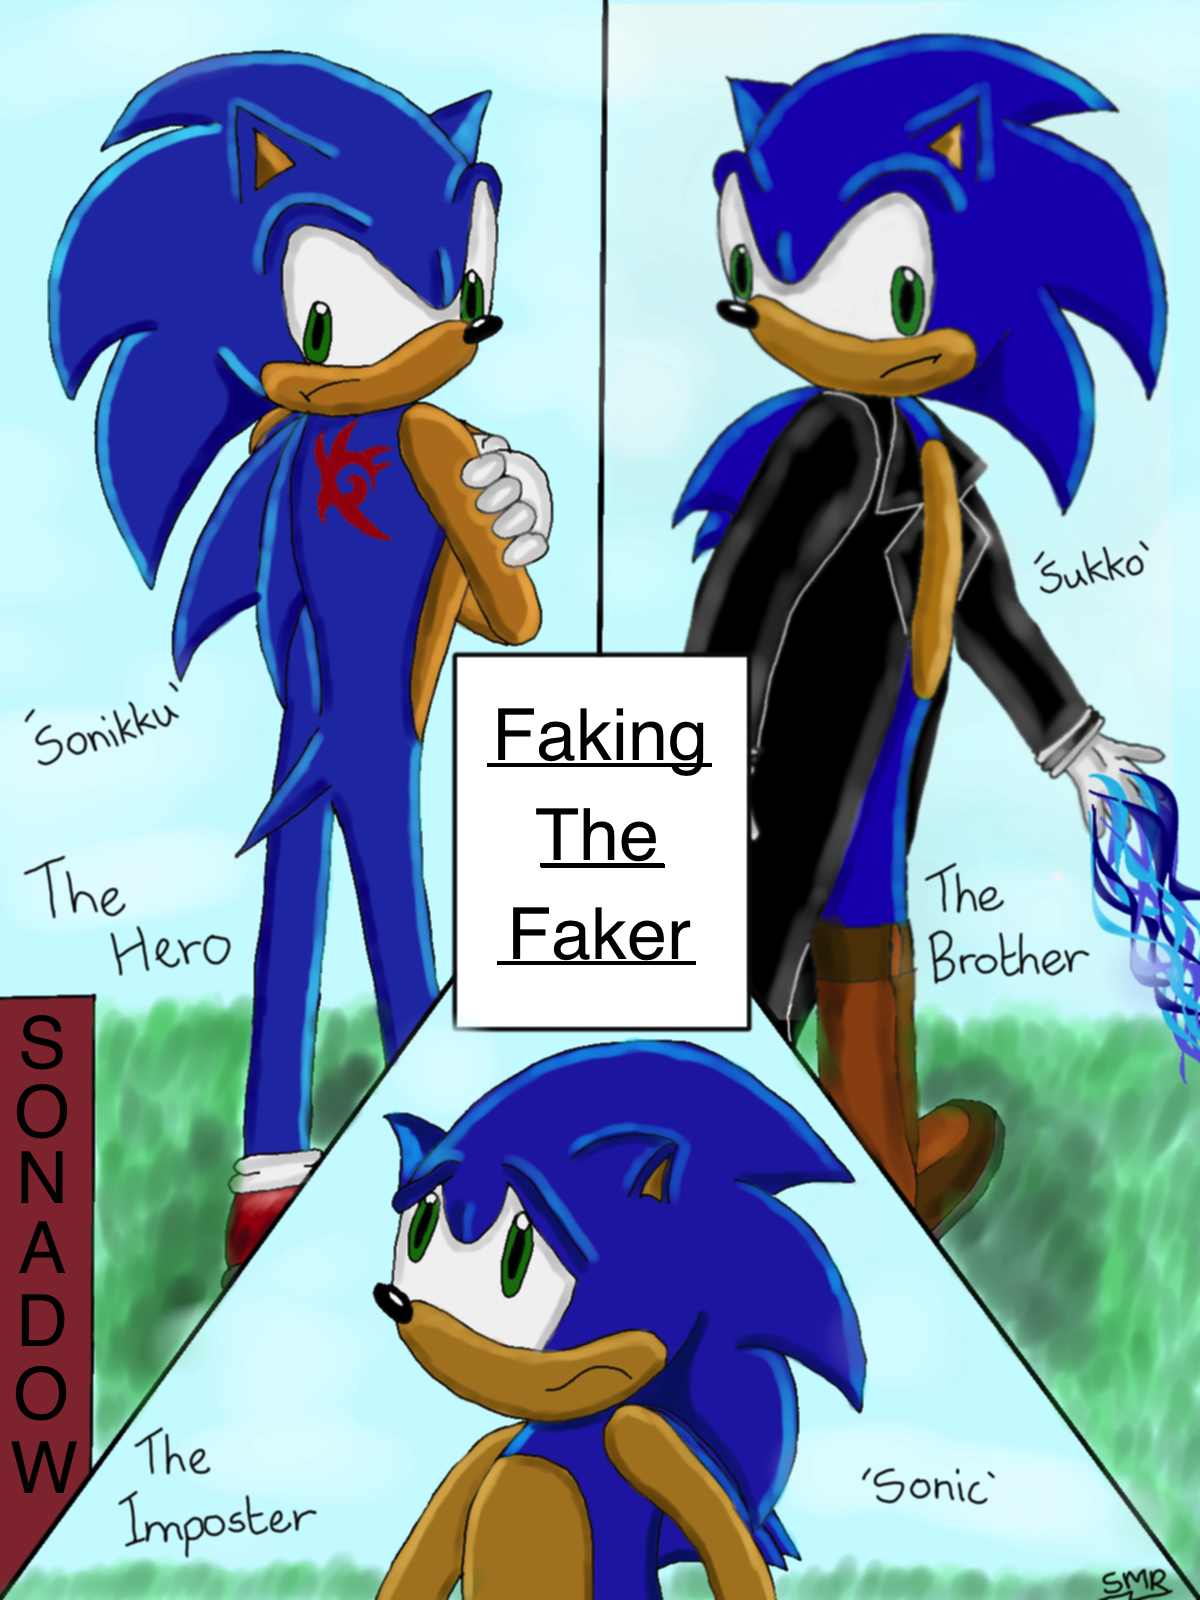 Faking The Faker - Chapter 1 - Spam5192 - Multifandom [Archive of